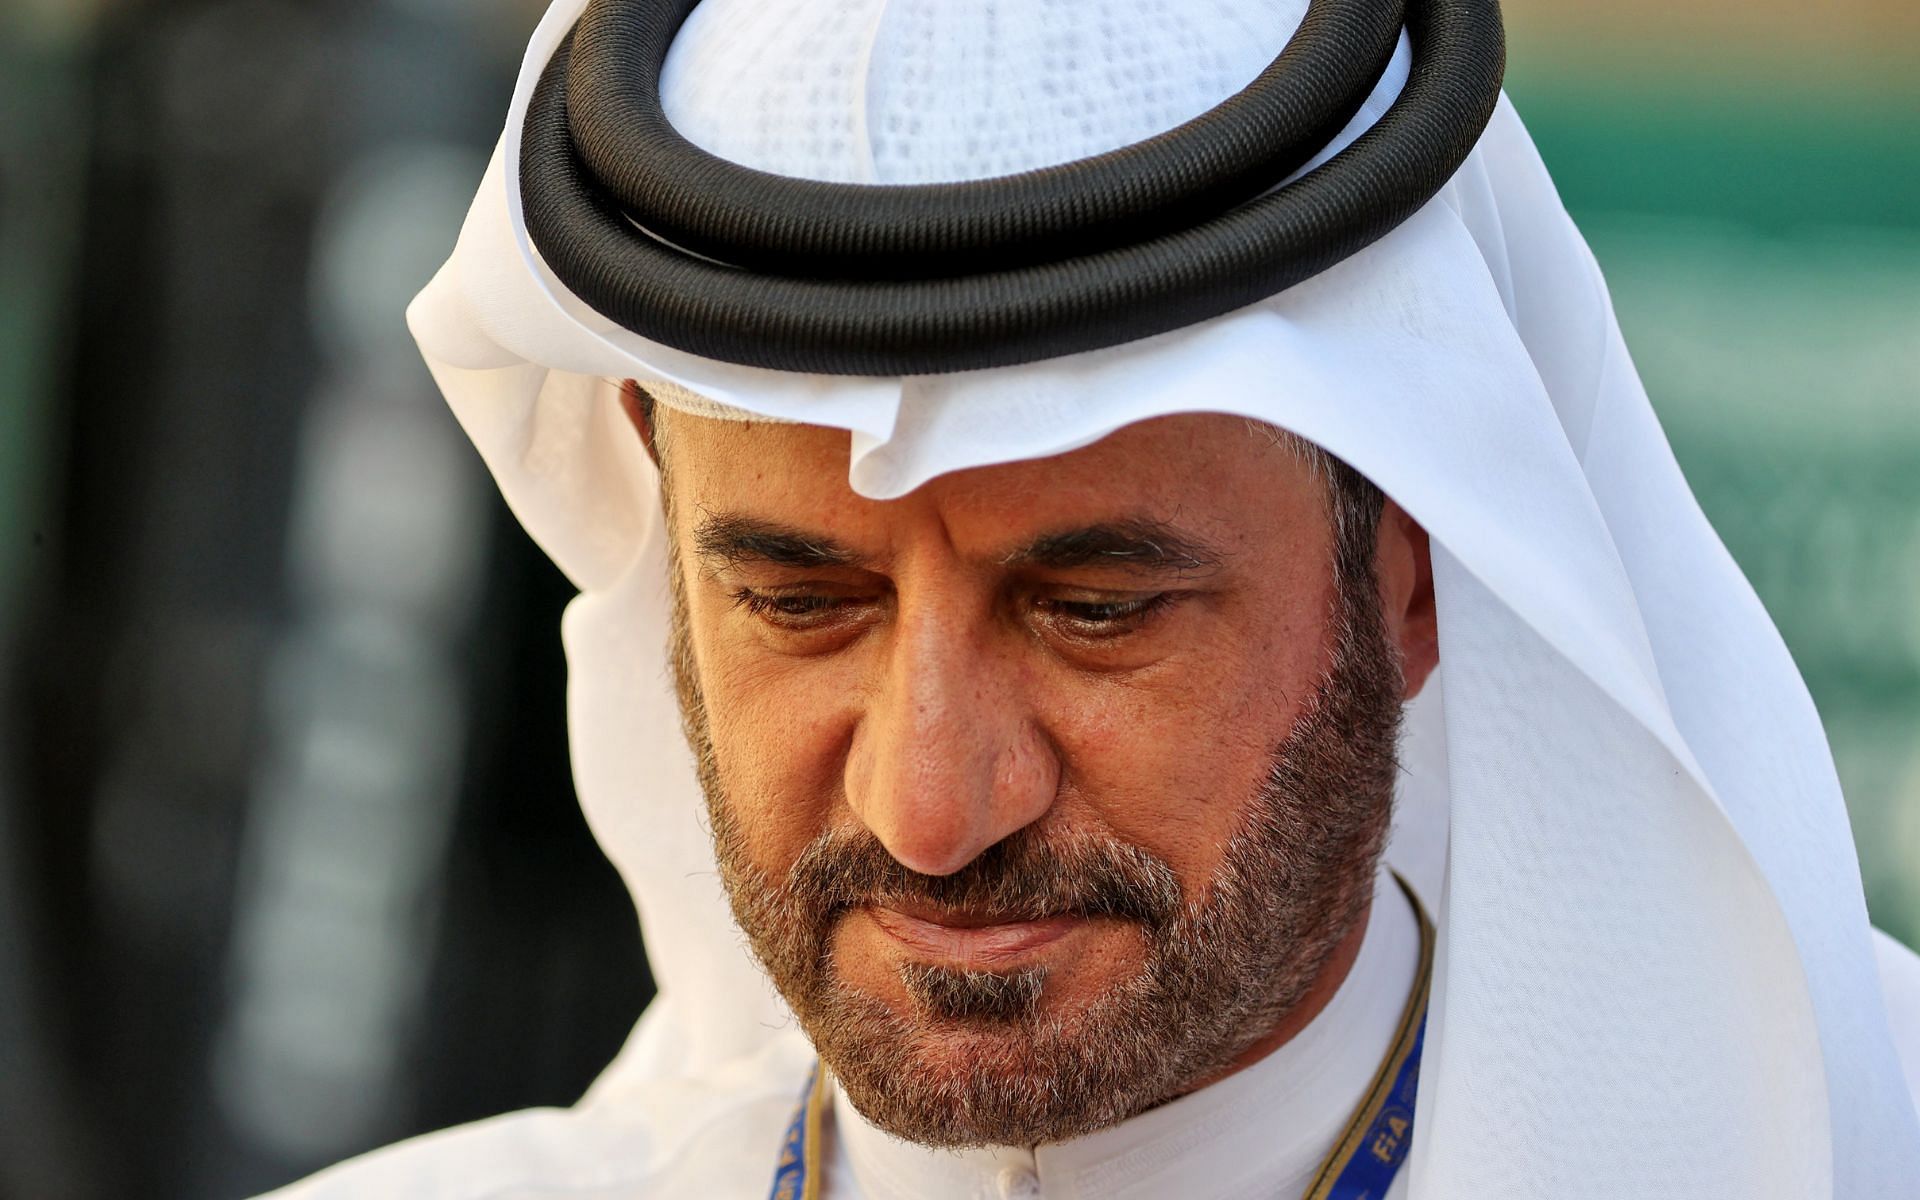 Mohammed bin Sulayem replaced Jean Todt as the president of the FIA after the conclusion of the 2021 F1 season